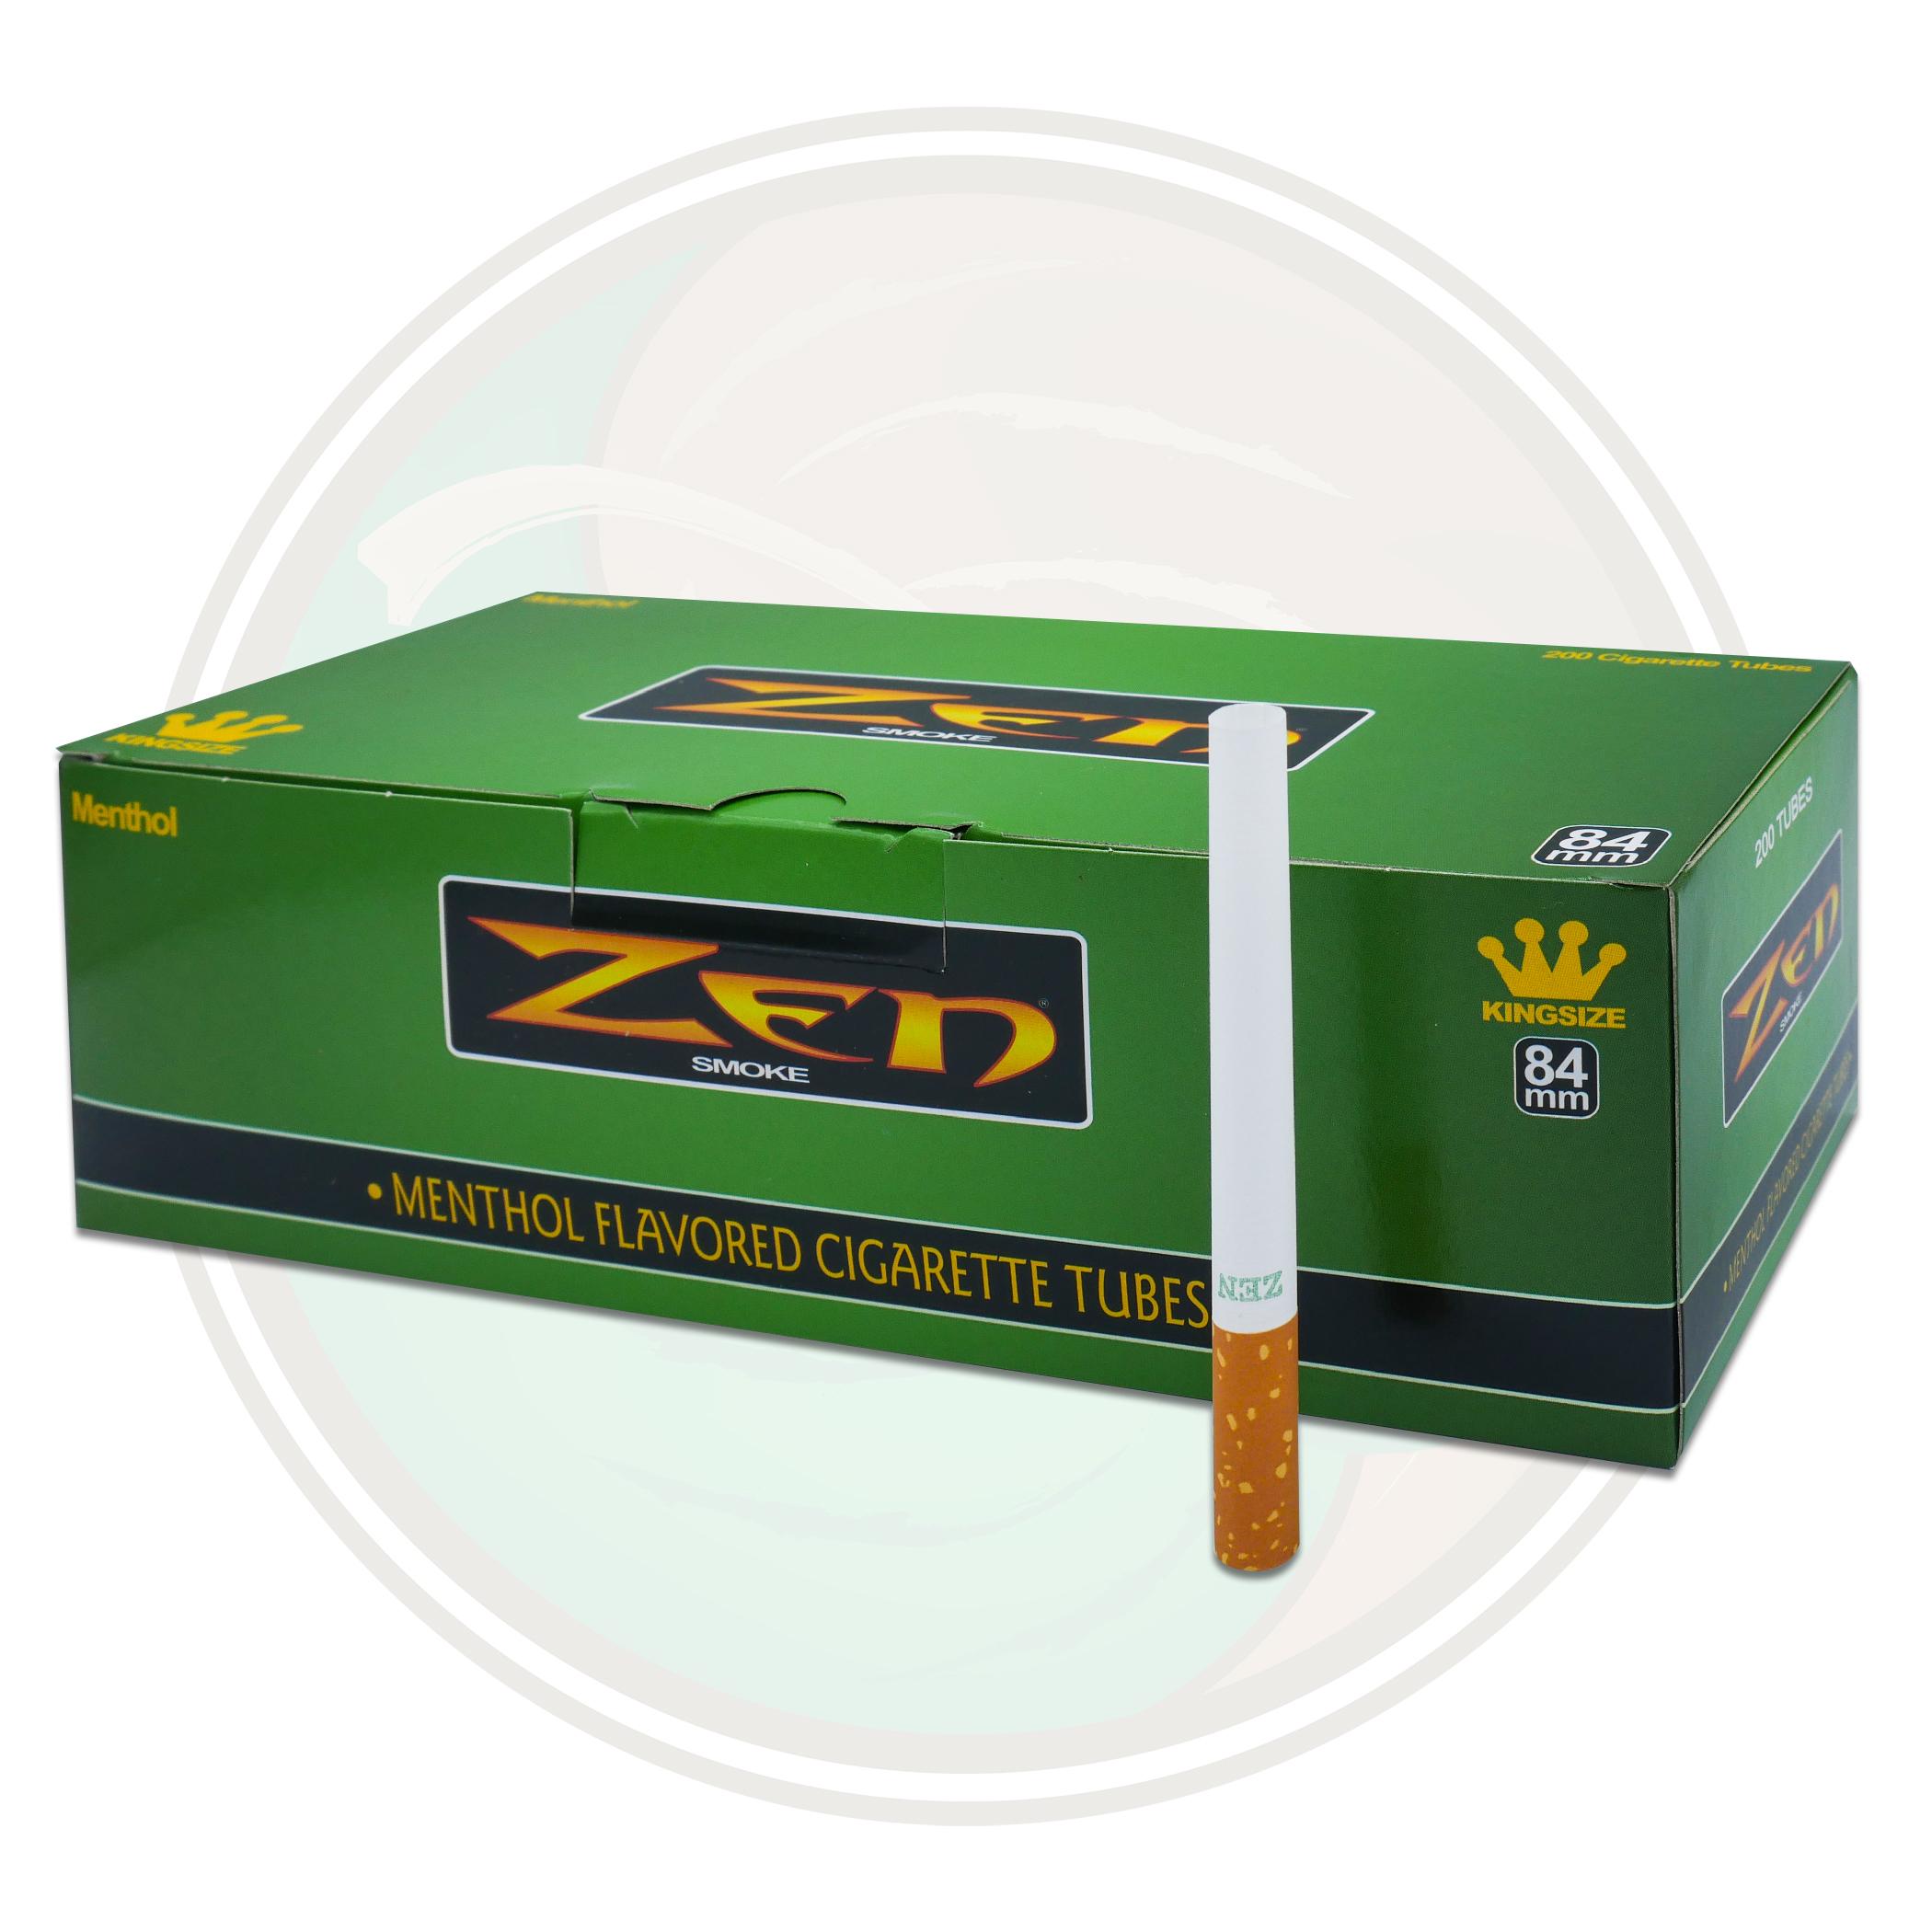 Zen Products - One of America's Popular Cigarette Tubes - The Art